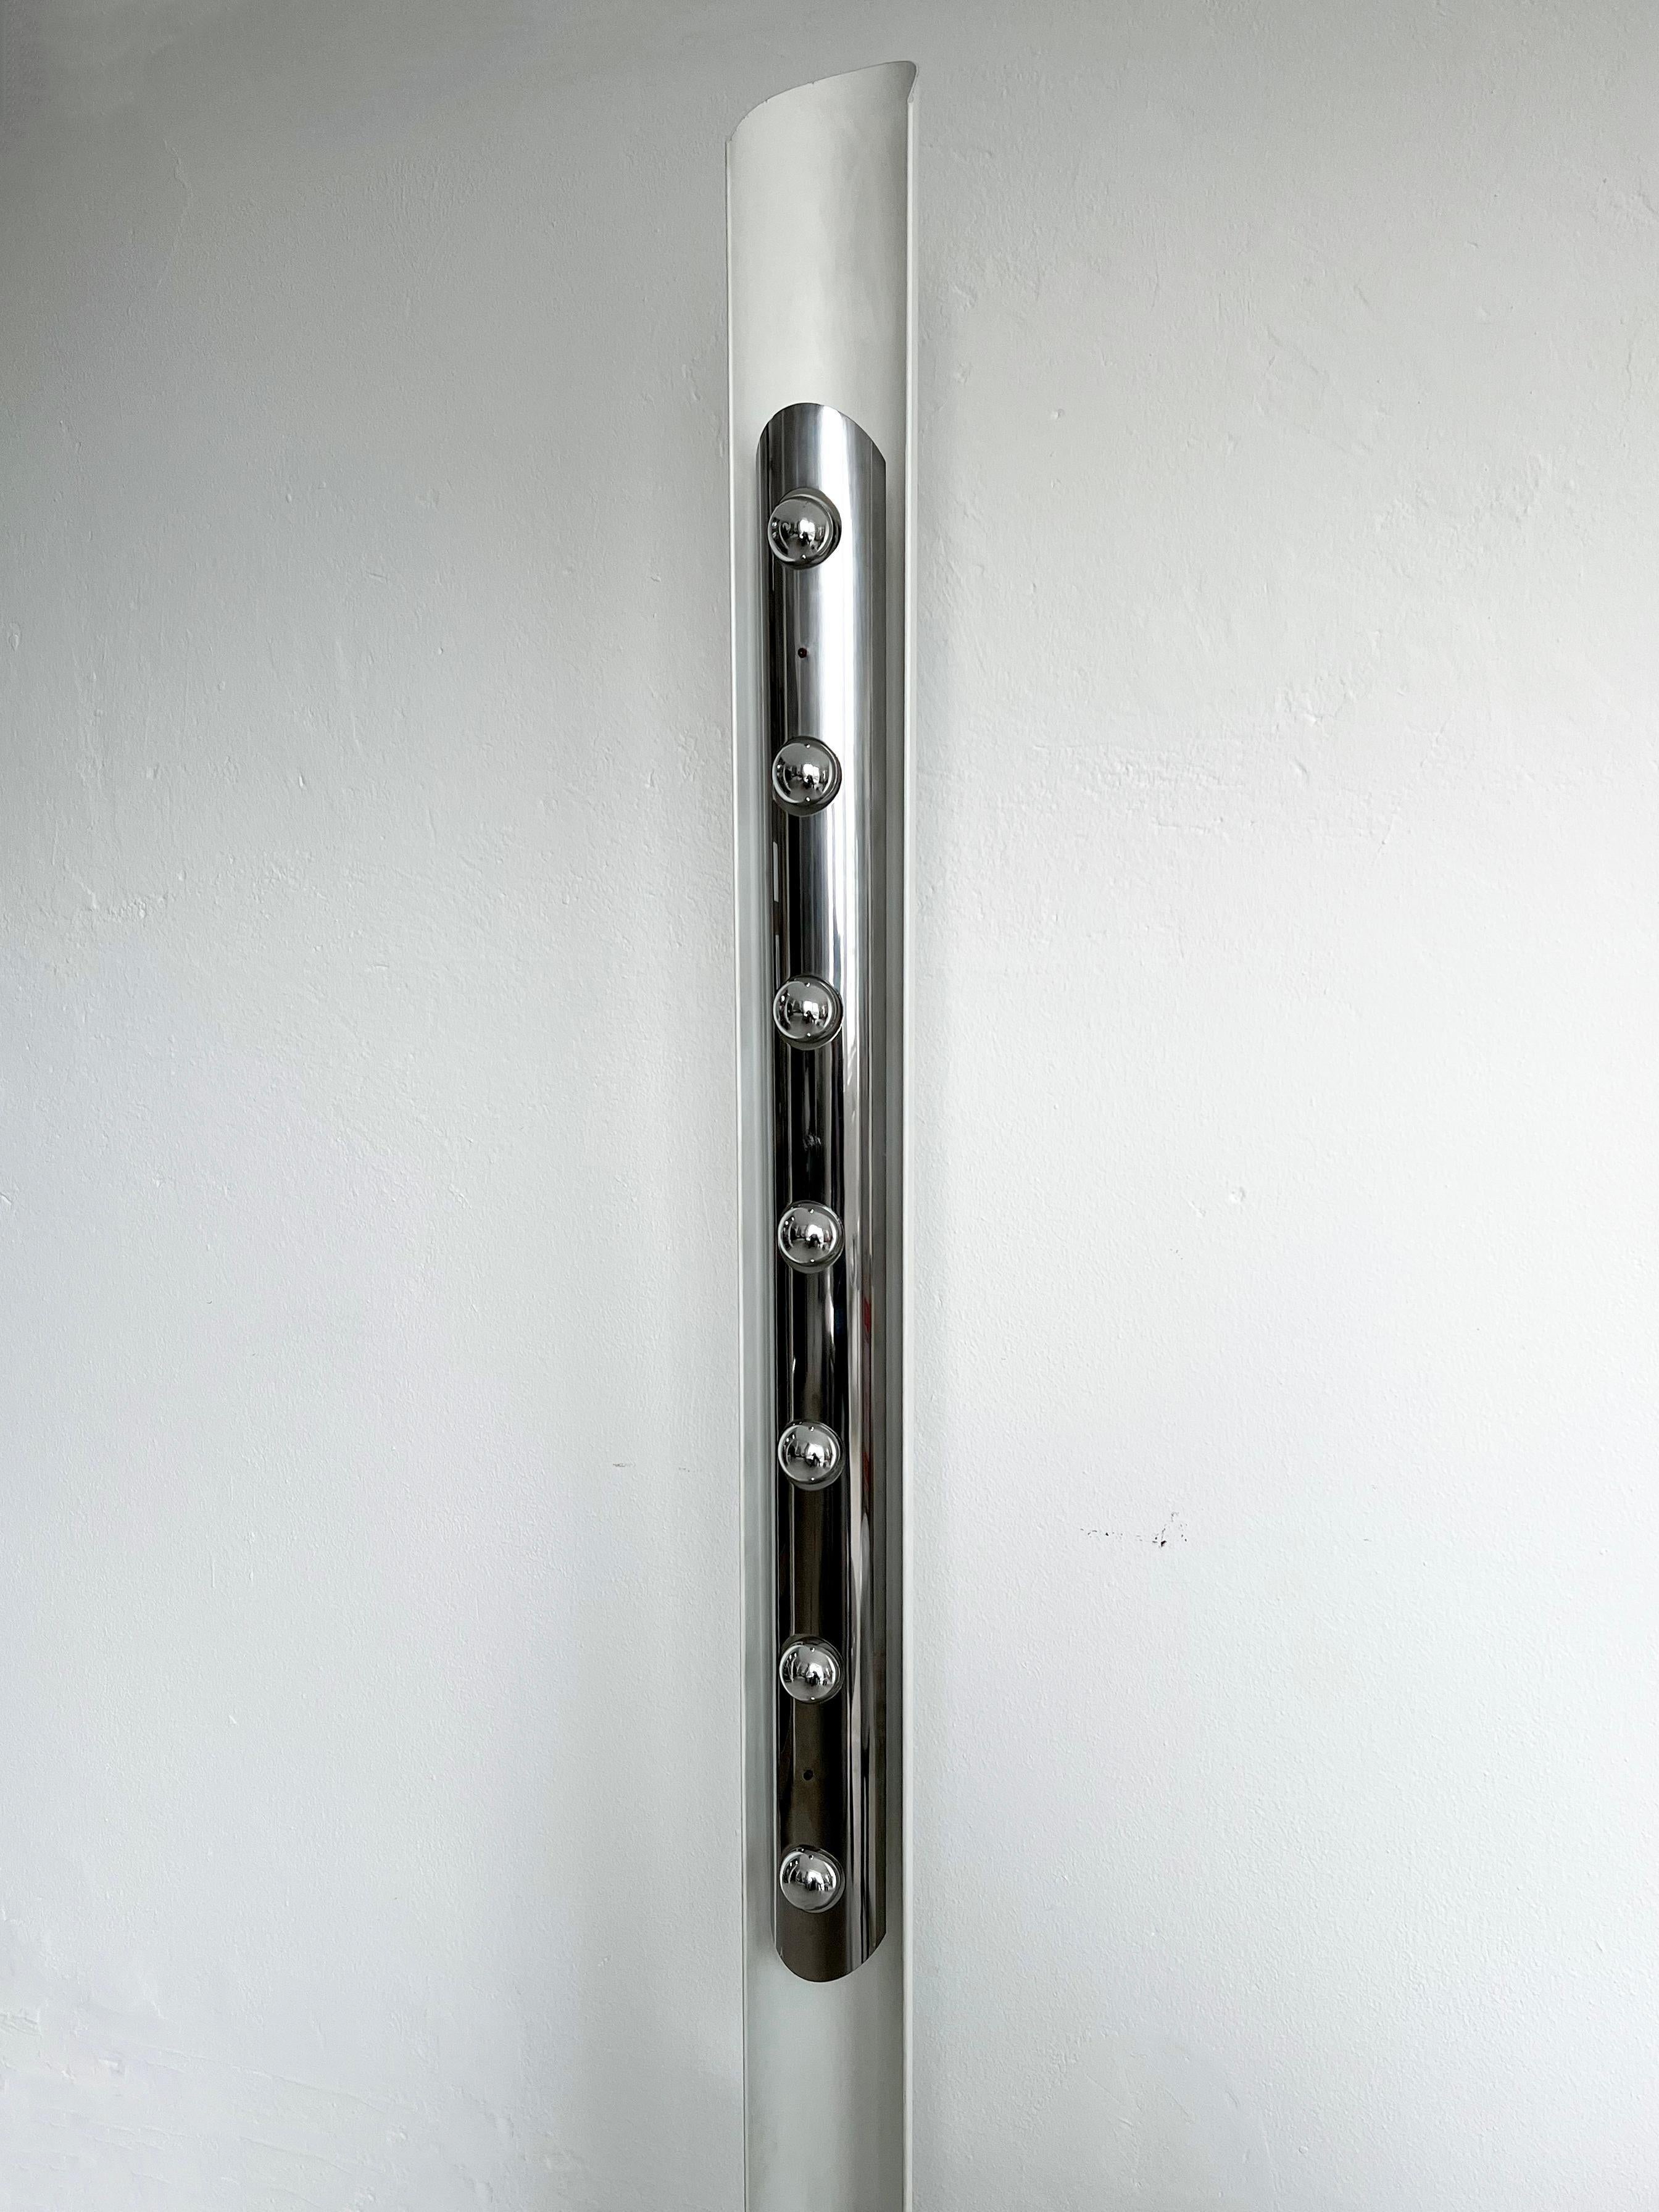 Space Age Floor Lamp, Chromed Metal, Totem, Collectible Light Sculpture In Good Condition For Sale In Milan, IT